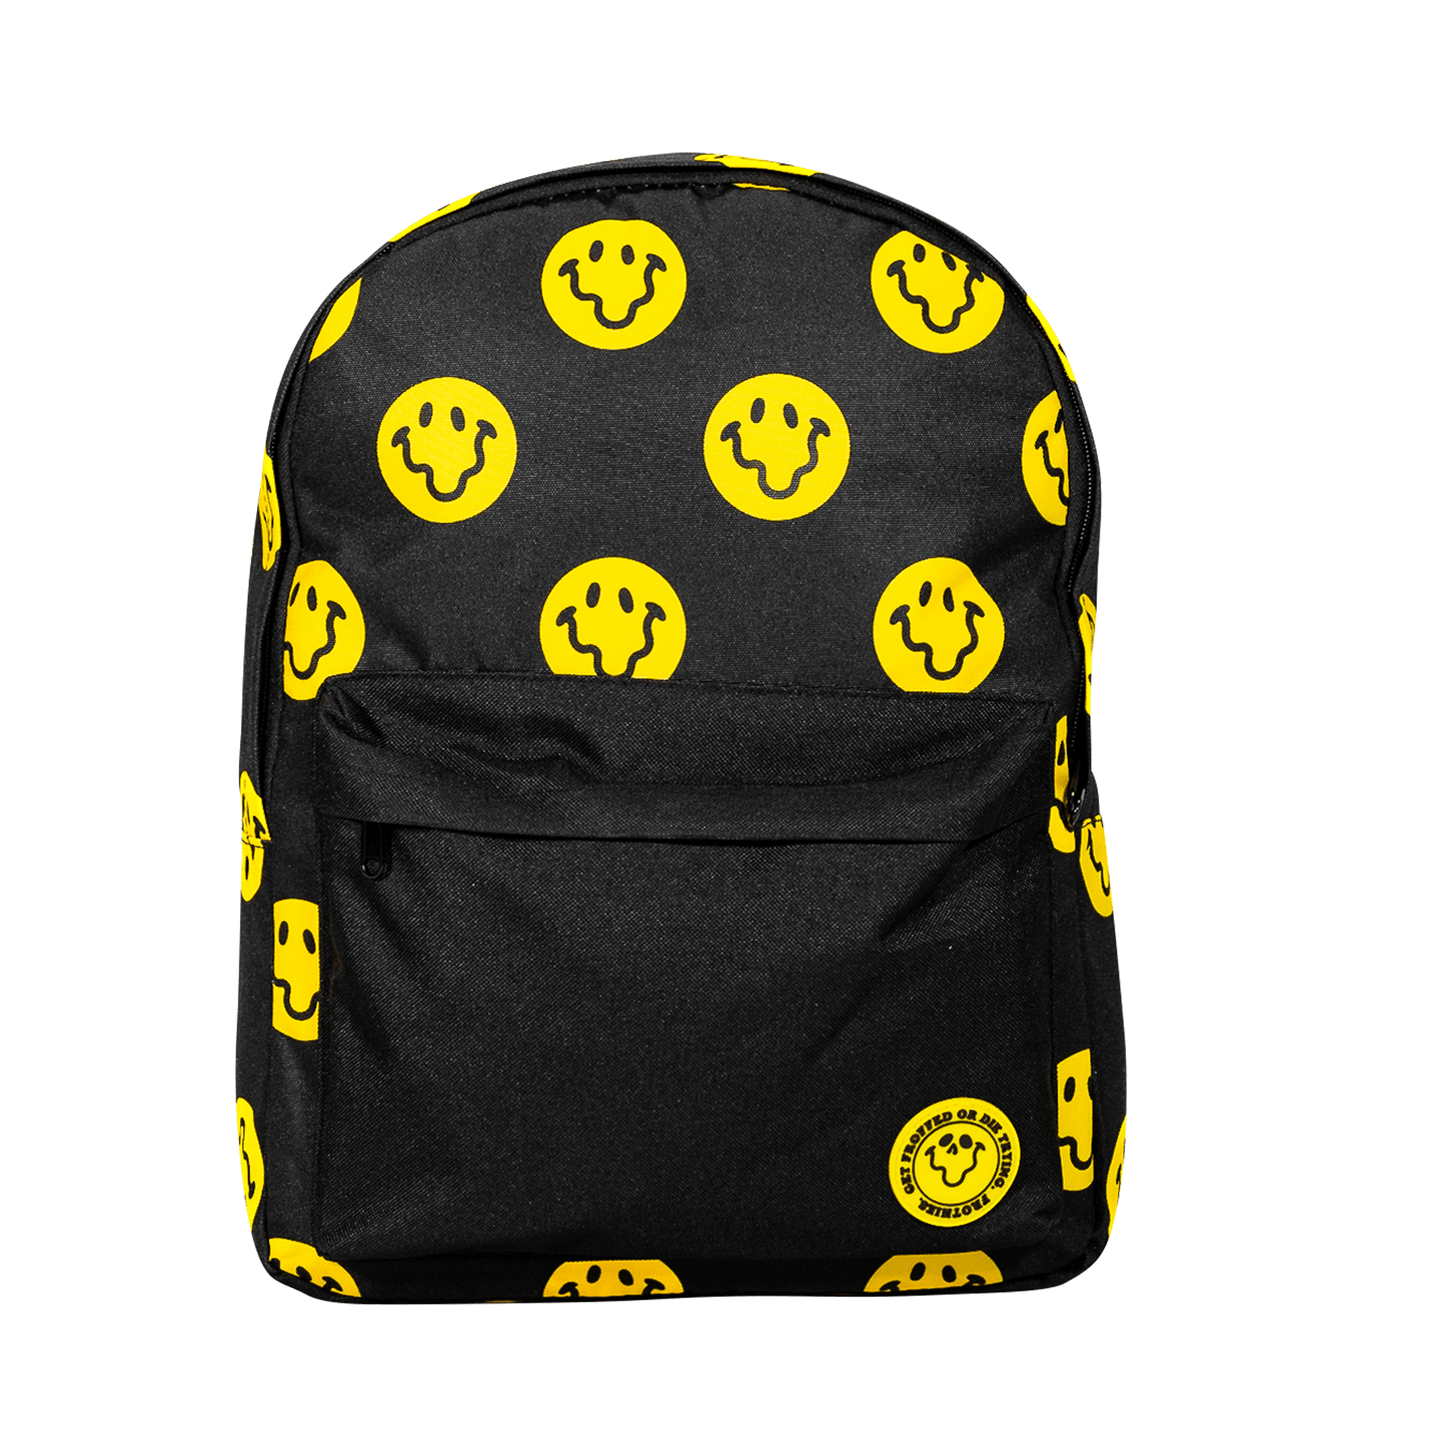 Get Froffed 3 Backpack Backpack Frothies